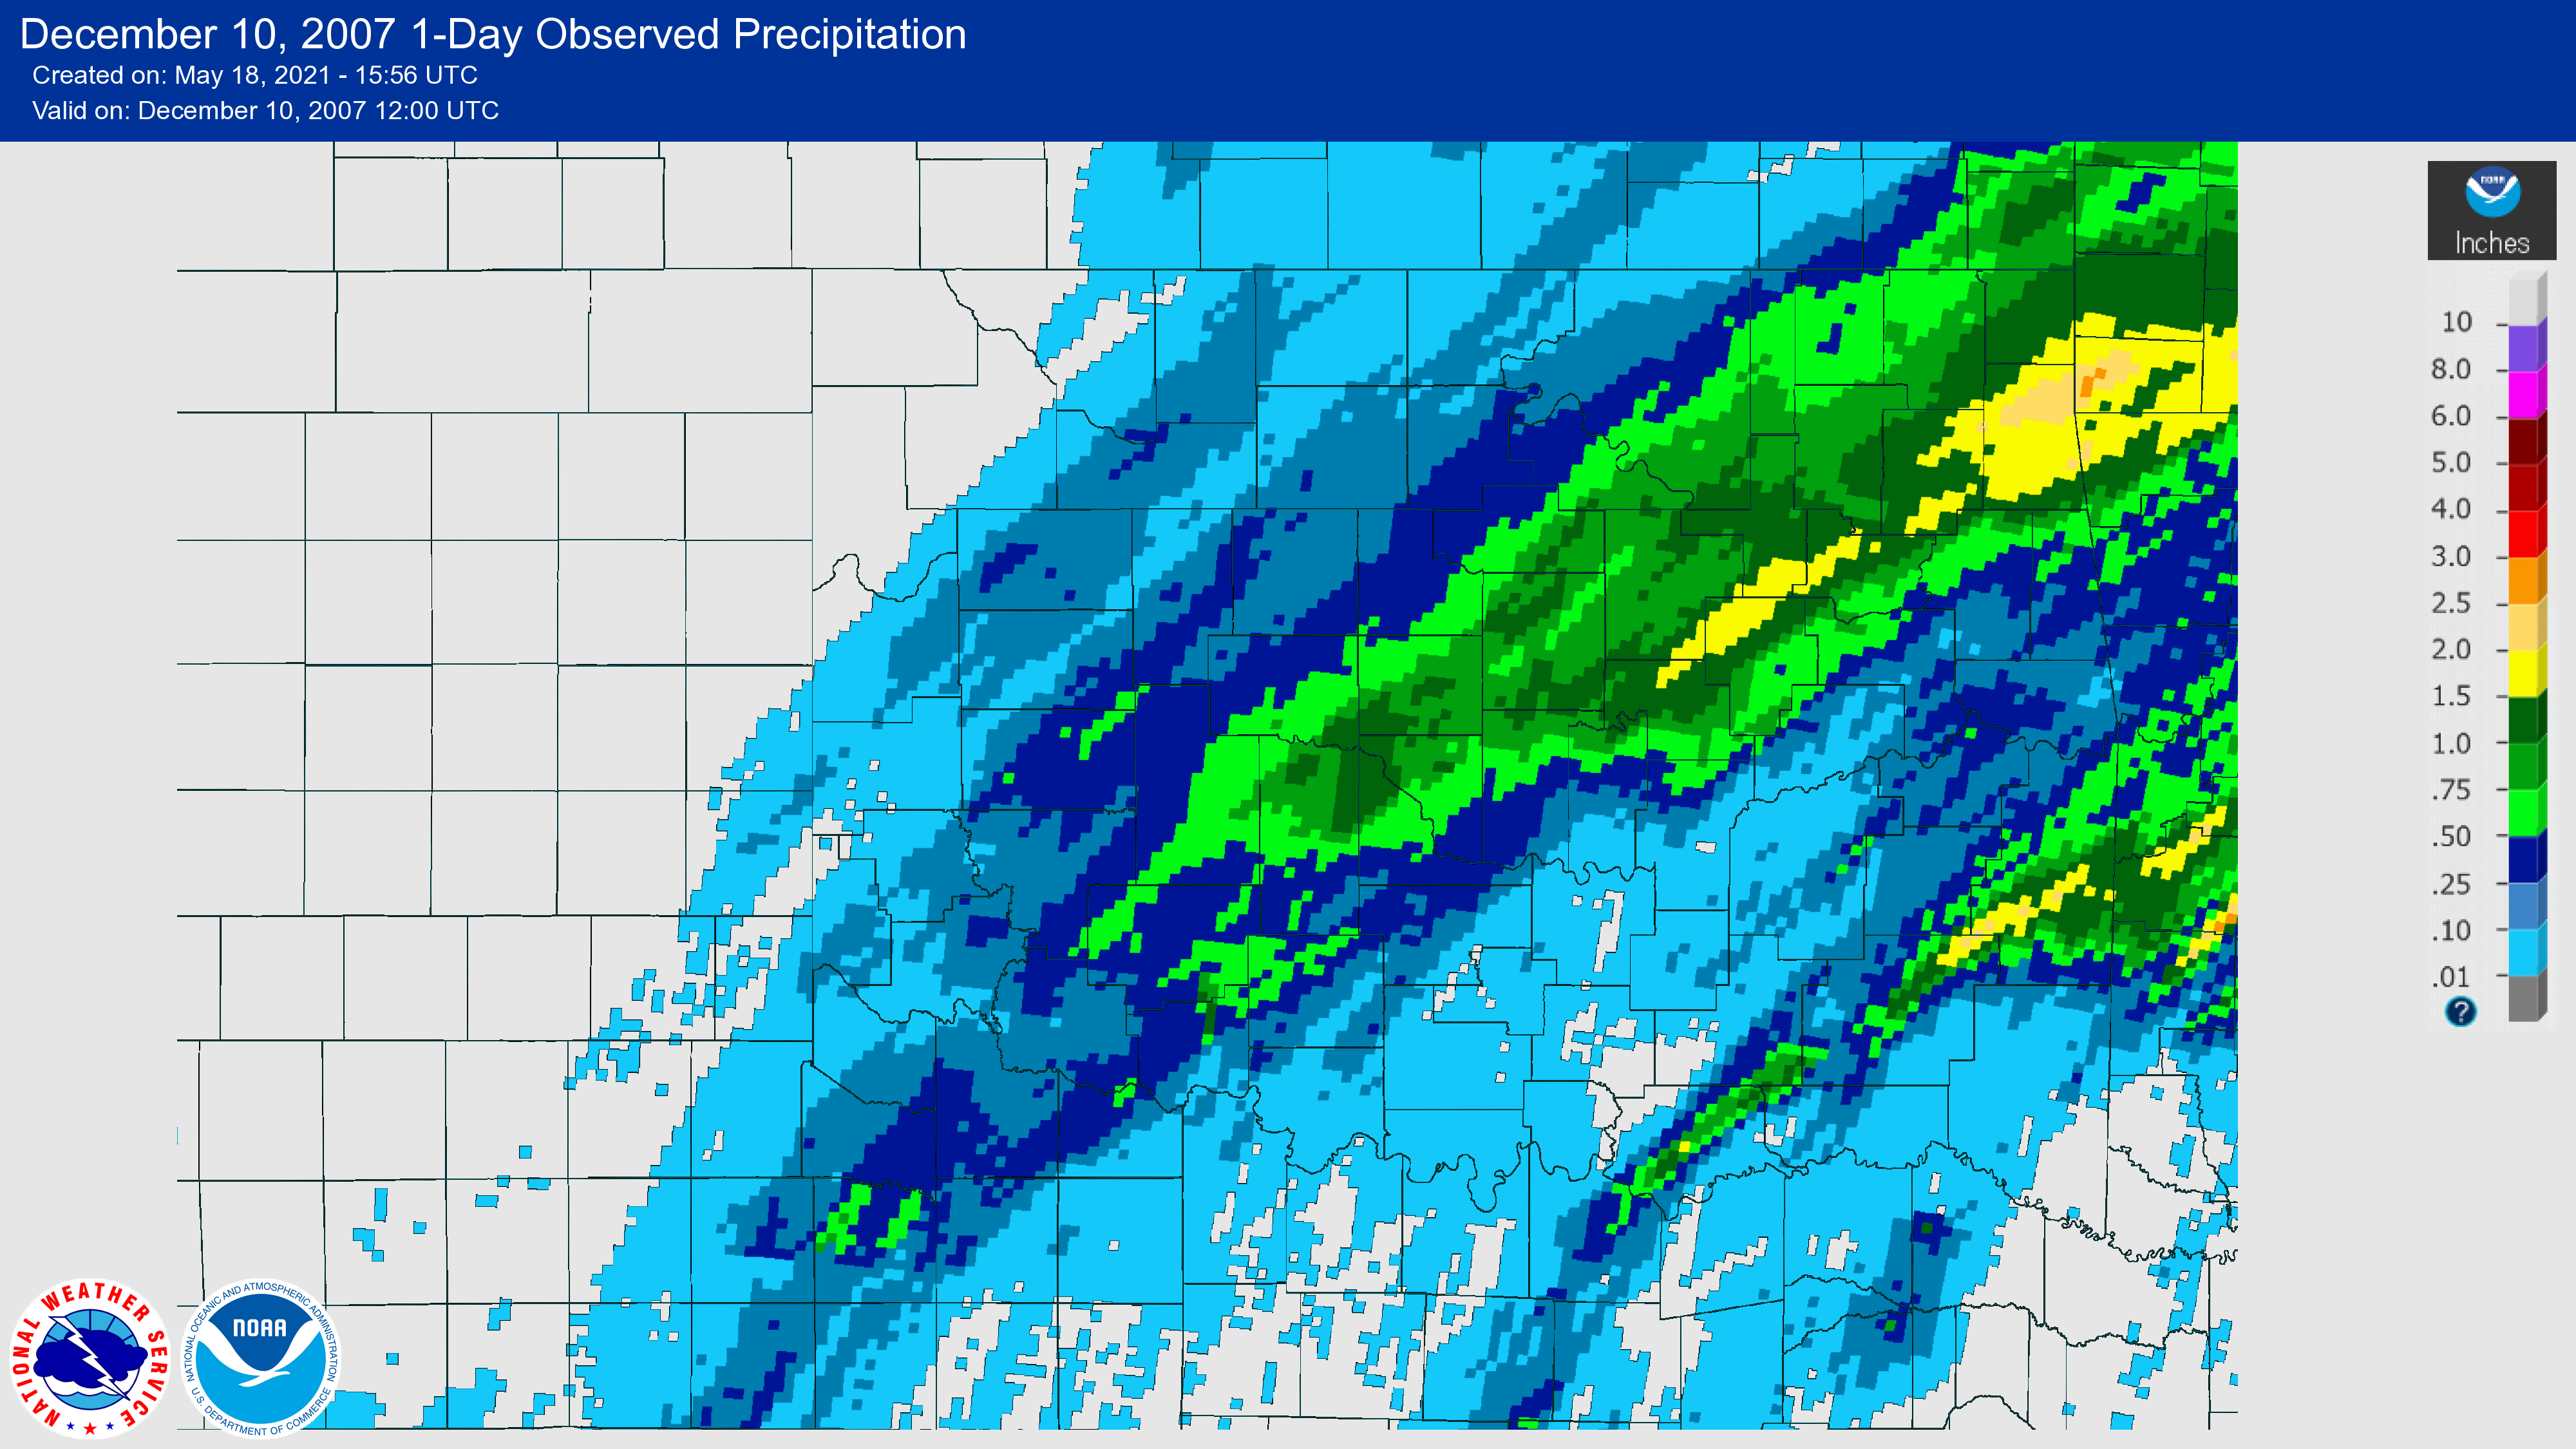 24-hour Precipitation Total ending at 6:00 AM CST on December 10, 2007 for the NWS Norman, Oklahoma Forecast Area